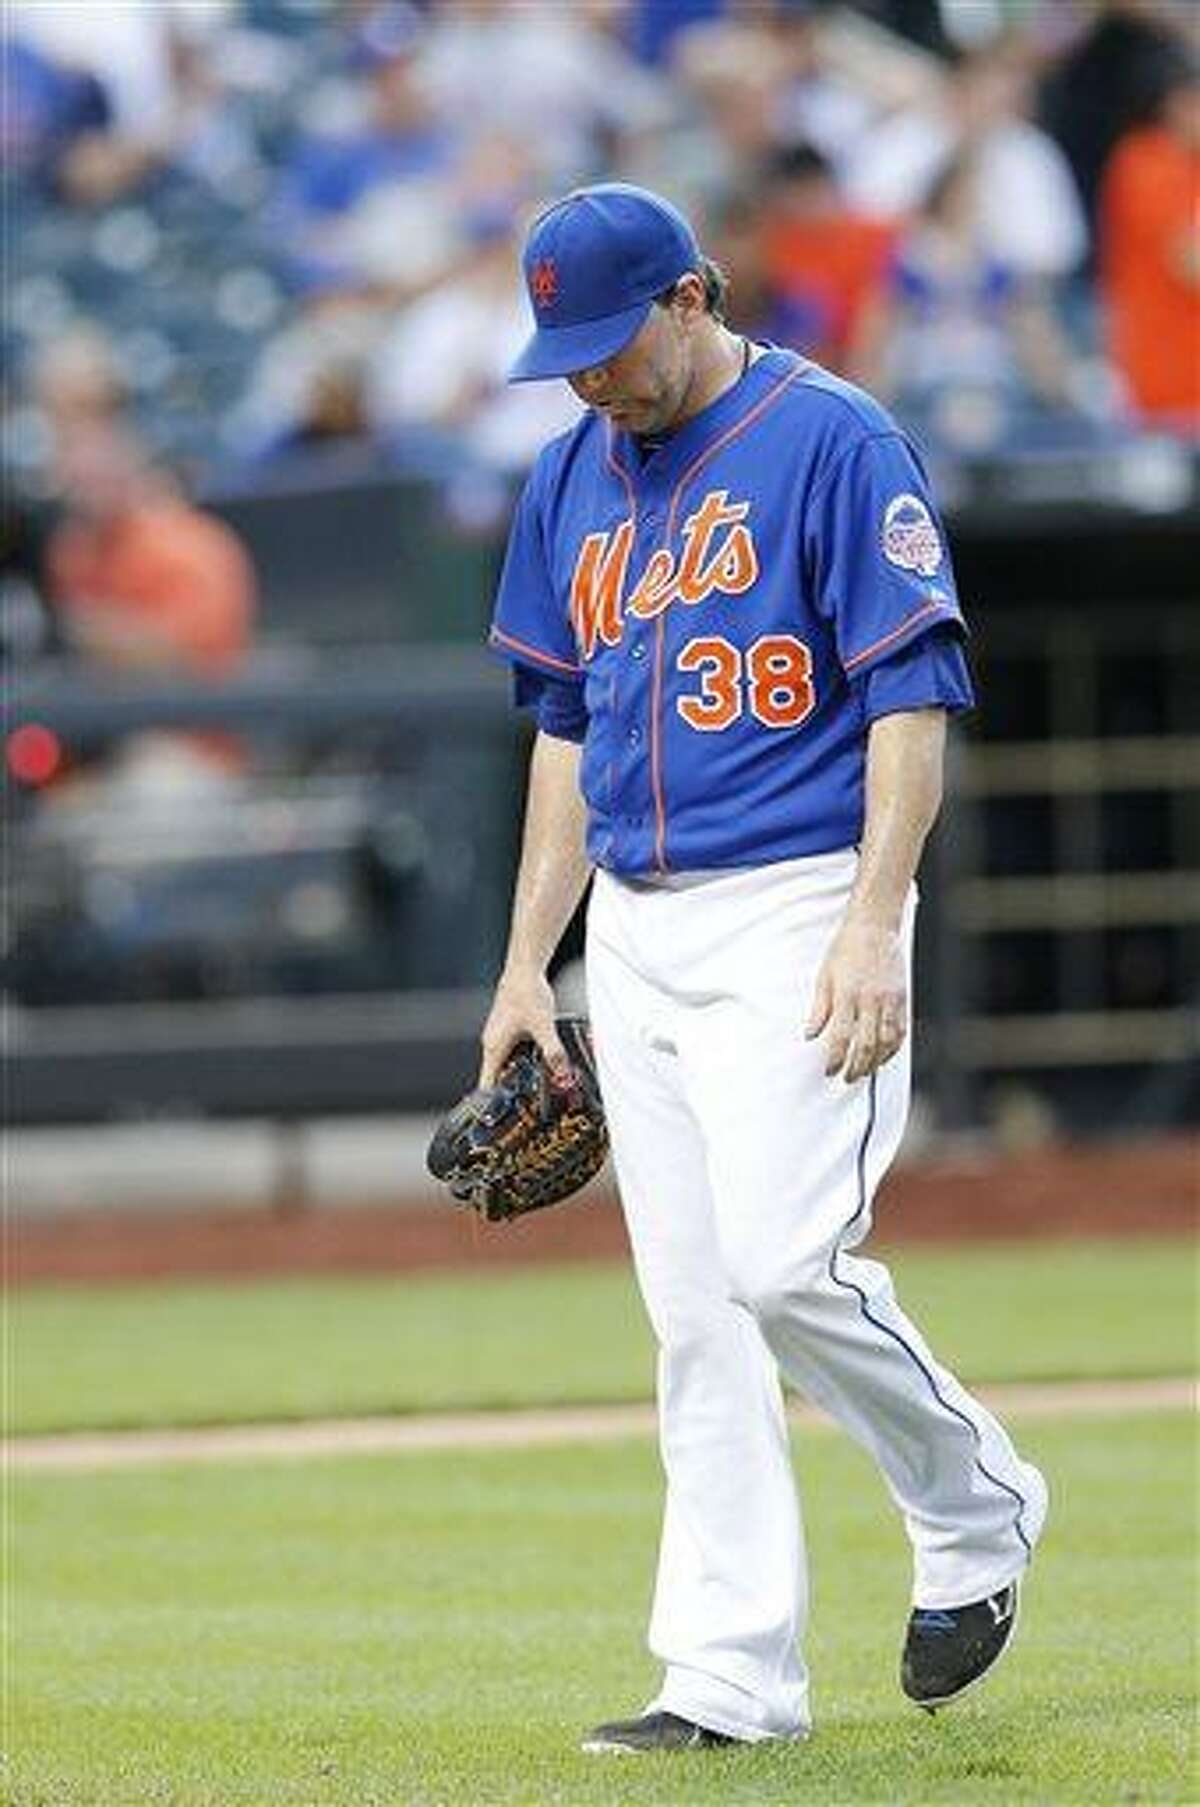 New York Mets pitcher Shaun Marcum (38) walks off the field after giving up a run in the 20th inning of 2-1 loss to the Miami Marlins during a baseball game at Citi Field in New York, Saturday, June 8, 2013. (AP Photo/Paul J. Bereswill)